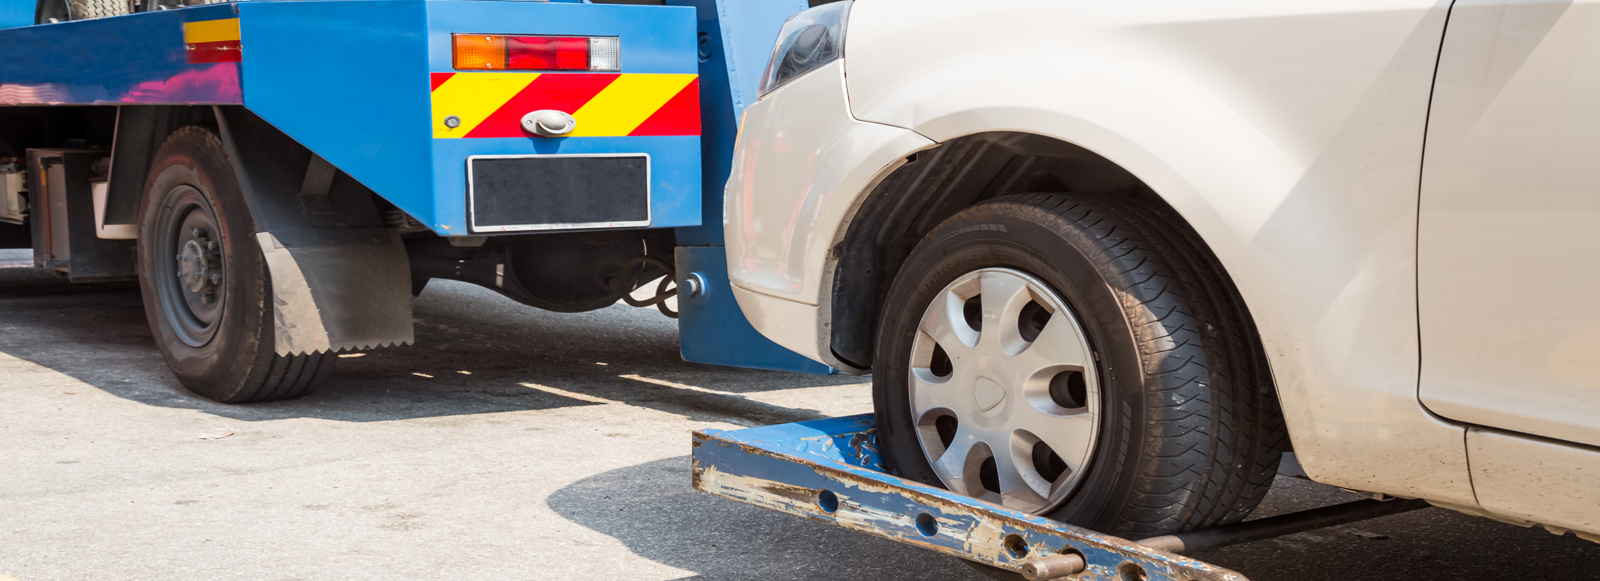 Car Towing Services London